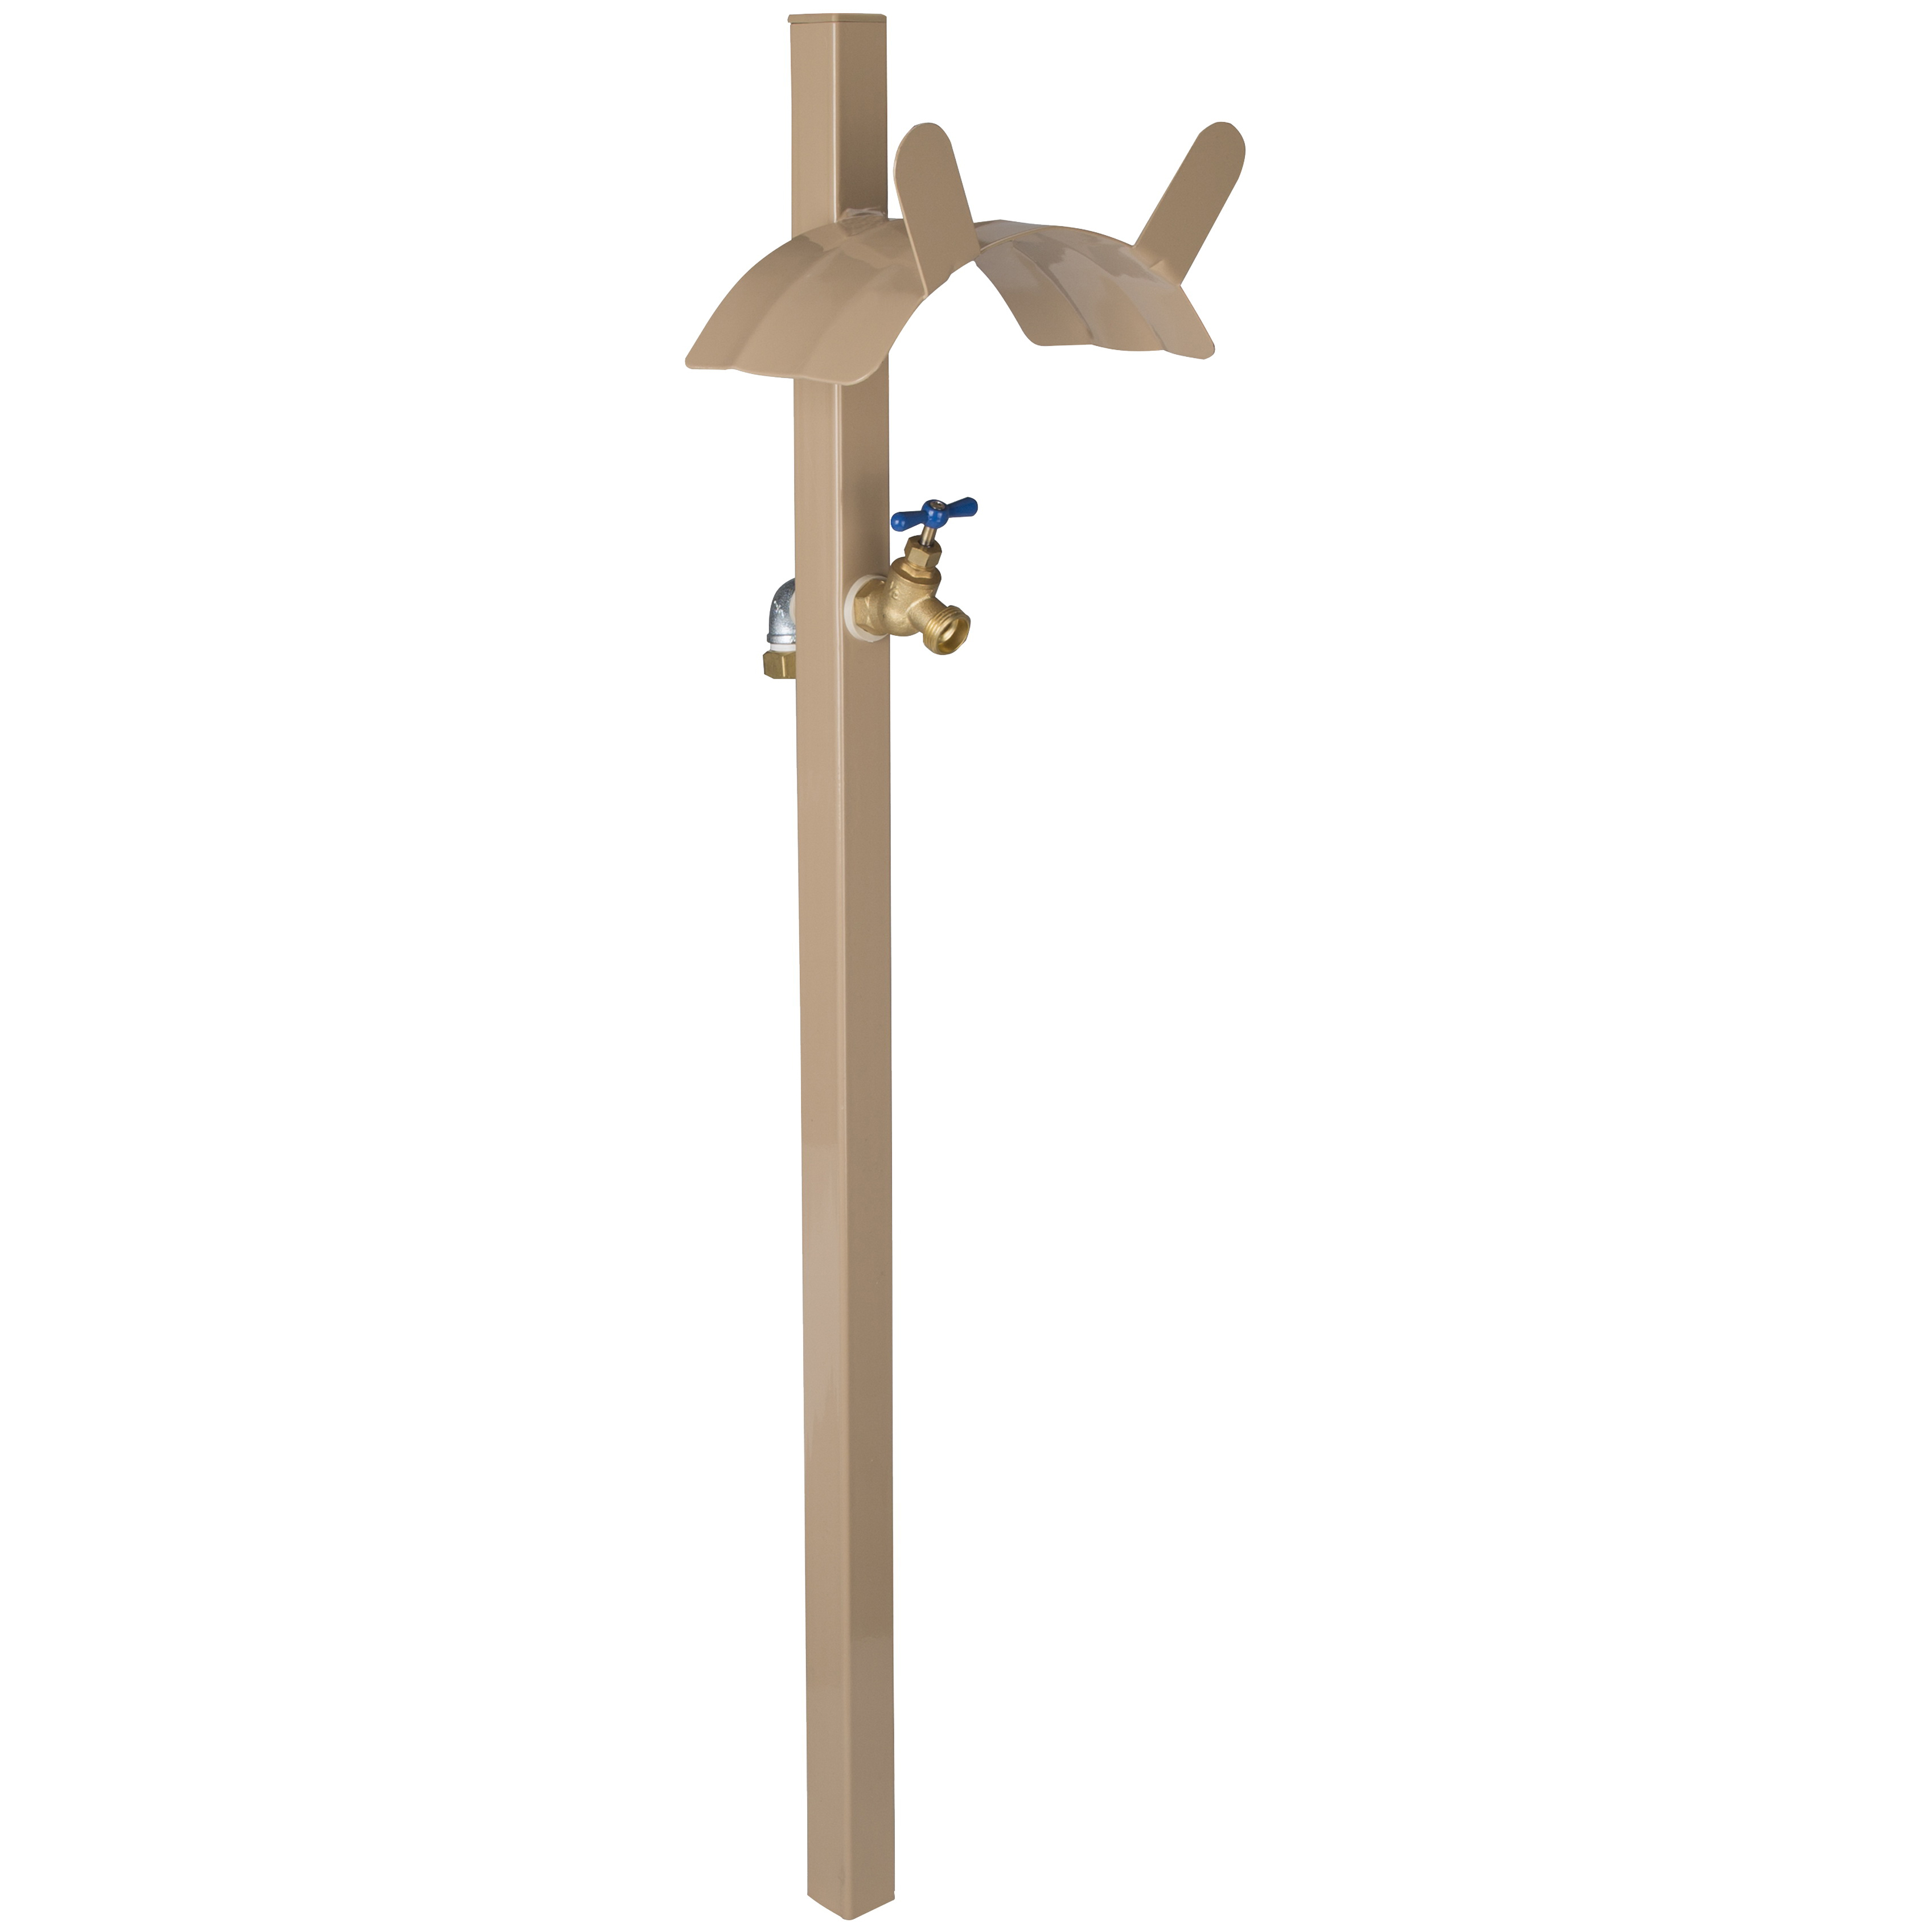 Landscapers Select HH-693 Hose Stand, 150 ft Capacity, Steel, Tan, Powder-Coated, Stake Mounting - 1